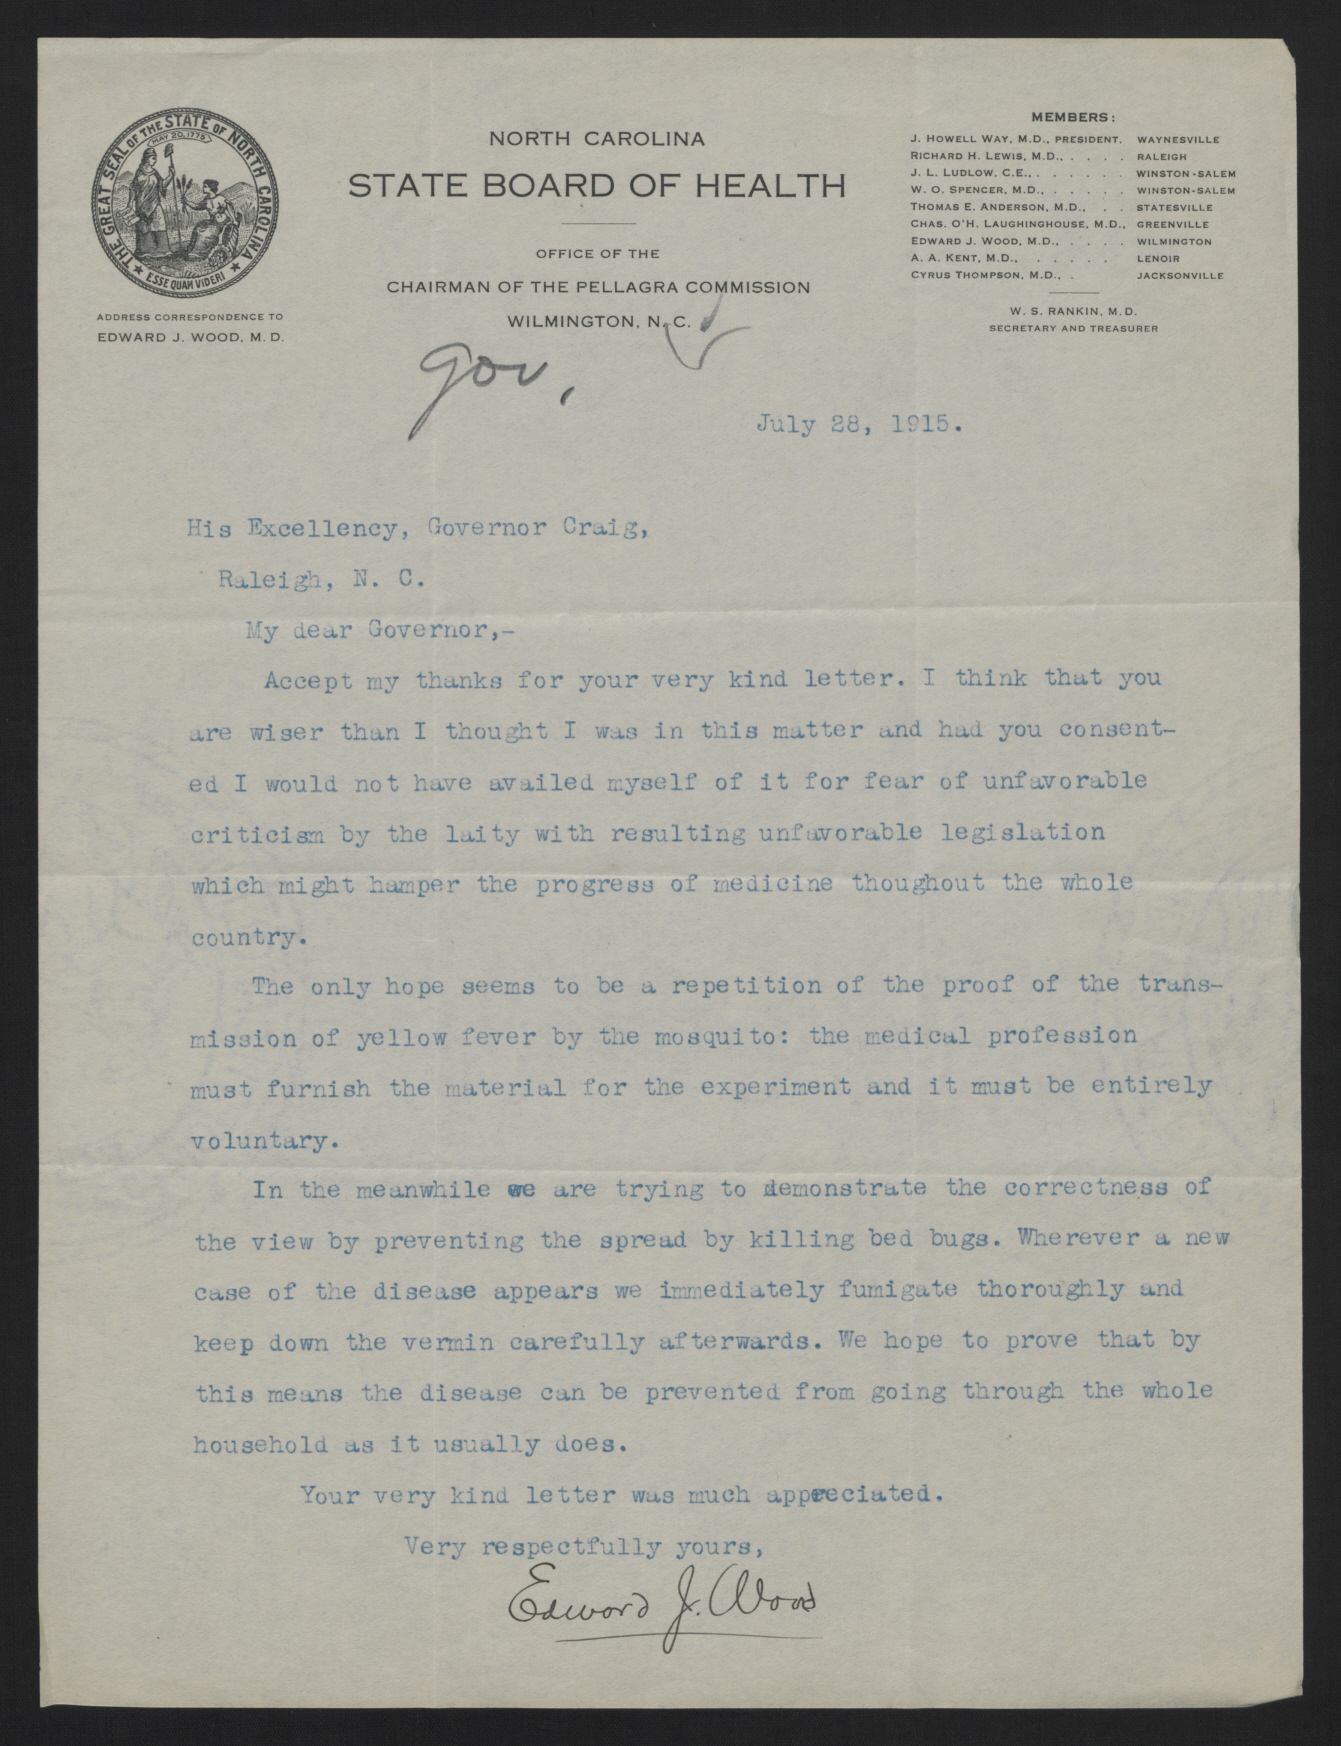 Letter from Wood to Craig, July 28, 1915